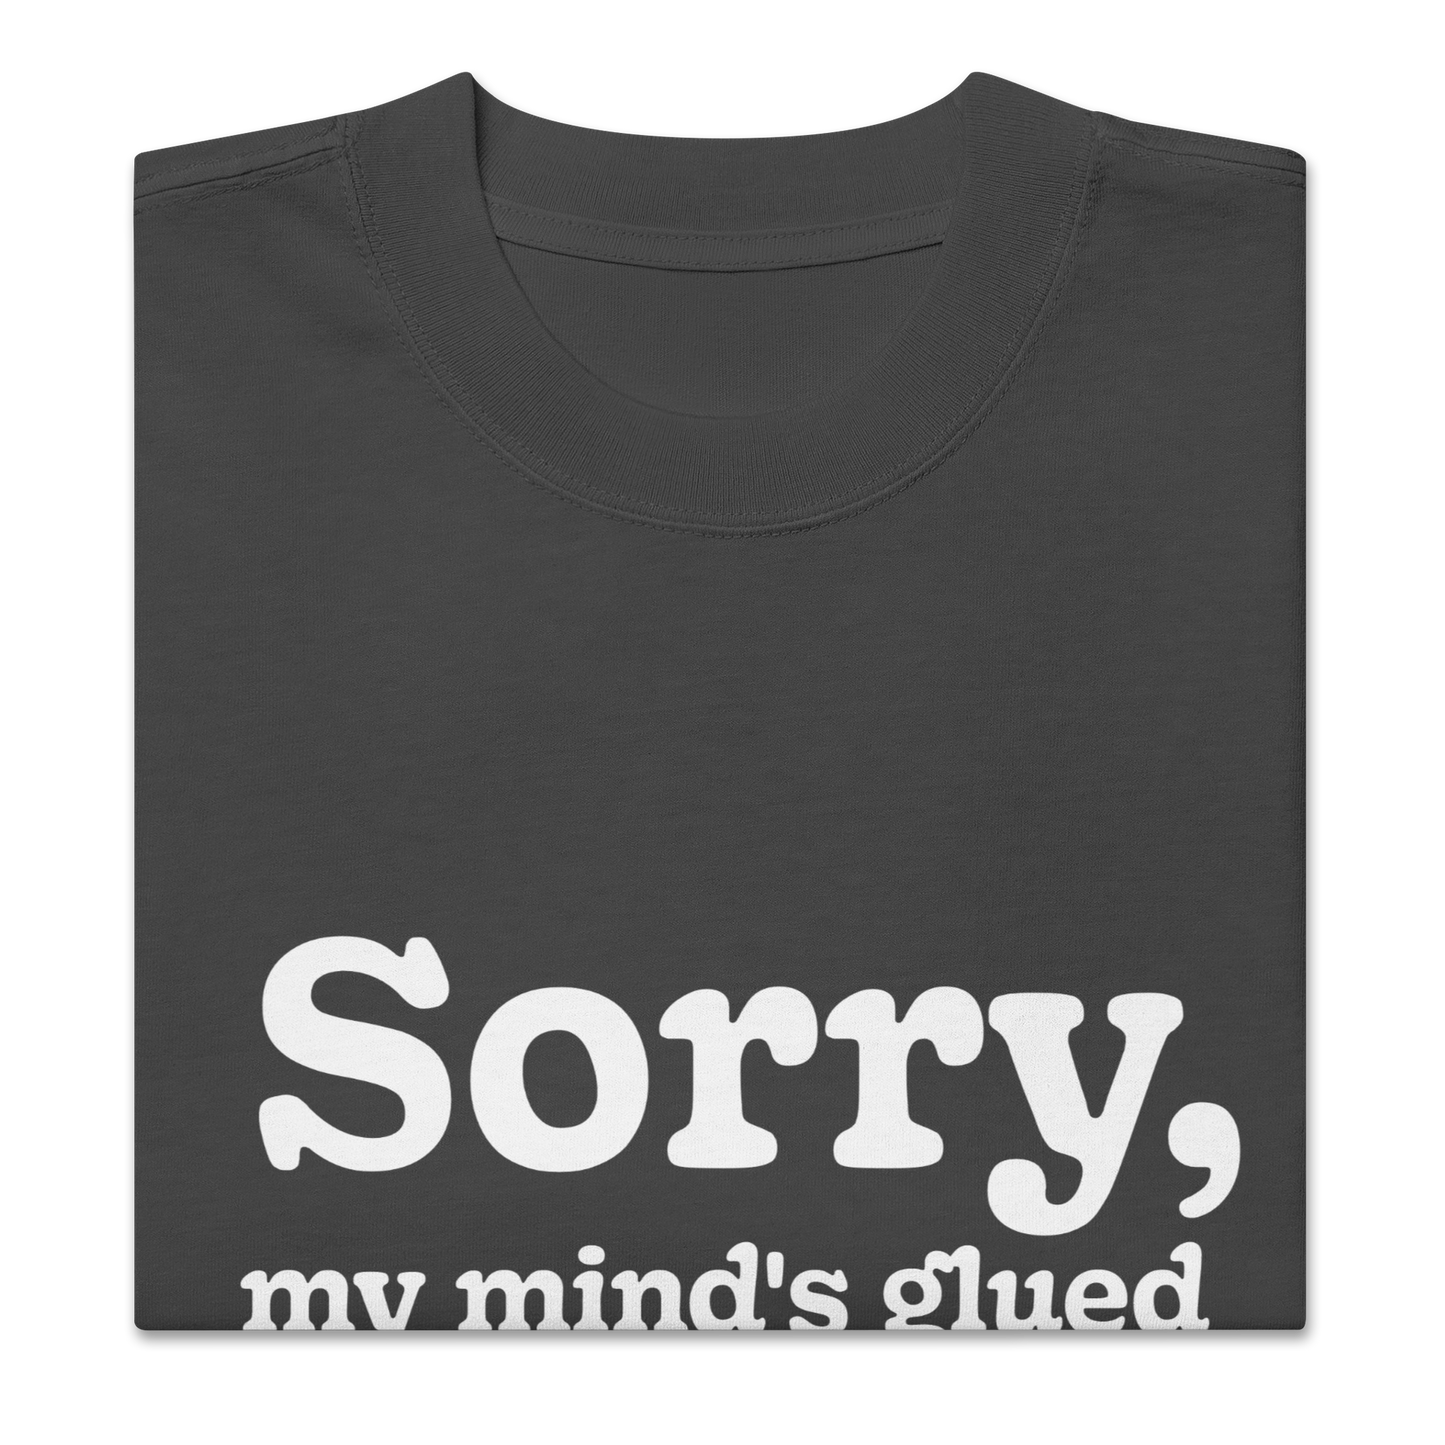 Sorry, my mind's glued in a collage realm! Oversized faded t-shirt